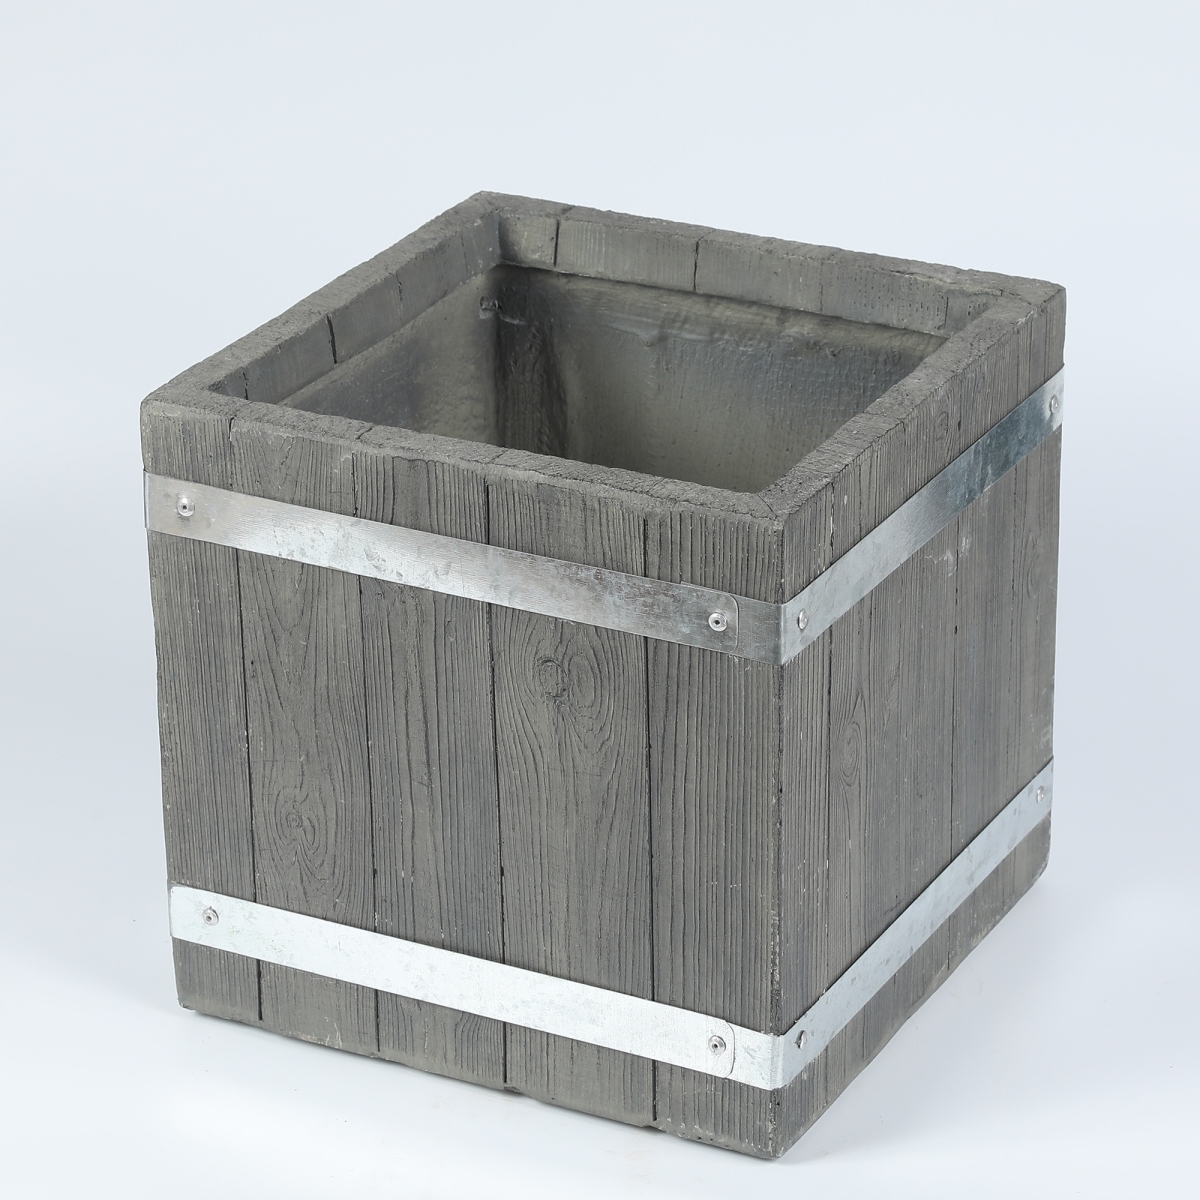 Whpl709 12.4 In. Square Mgo Fiberclay Plank Style Planter